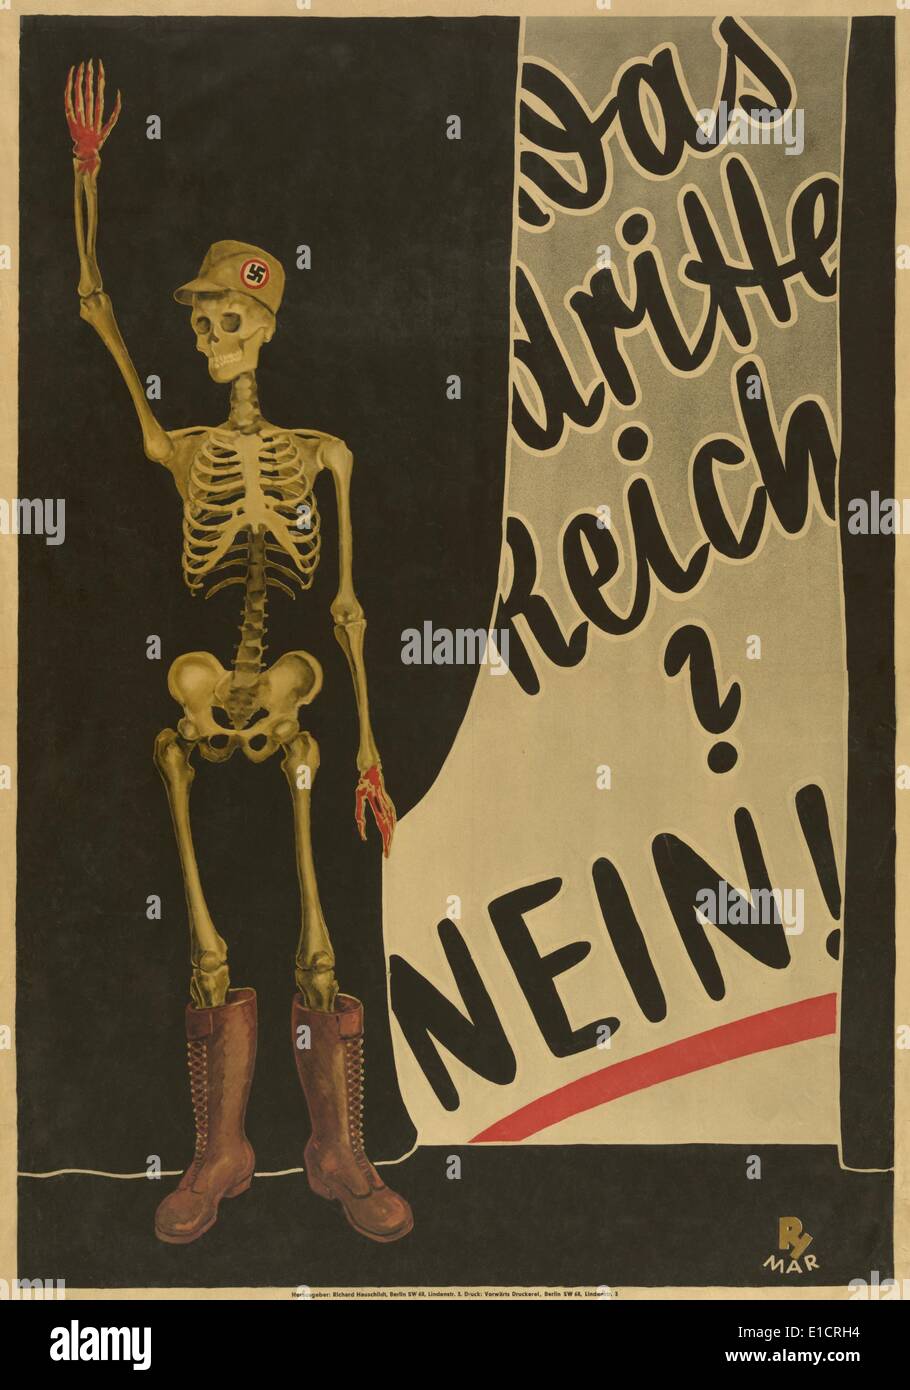 Anti-Nazi poster, ca. 1930 depicts skeleton with bloody hands, a hat with swastika on it, and boots that lace to the knee. The Stock Photo